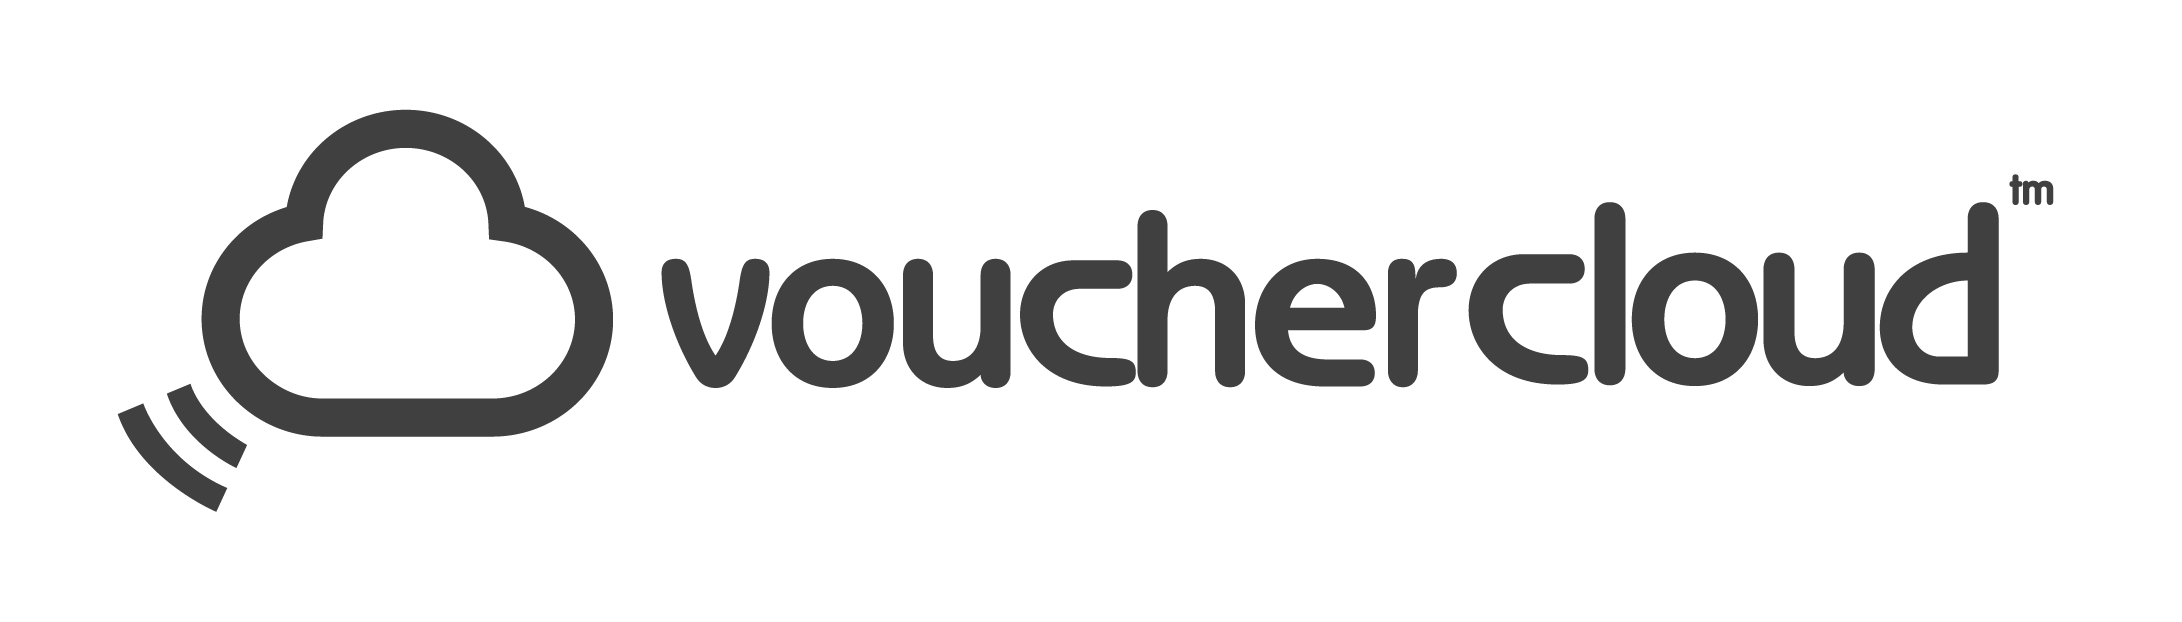 in touch with regards to vouchercloud's PR and Media... vouchercloud